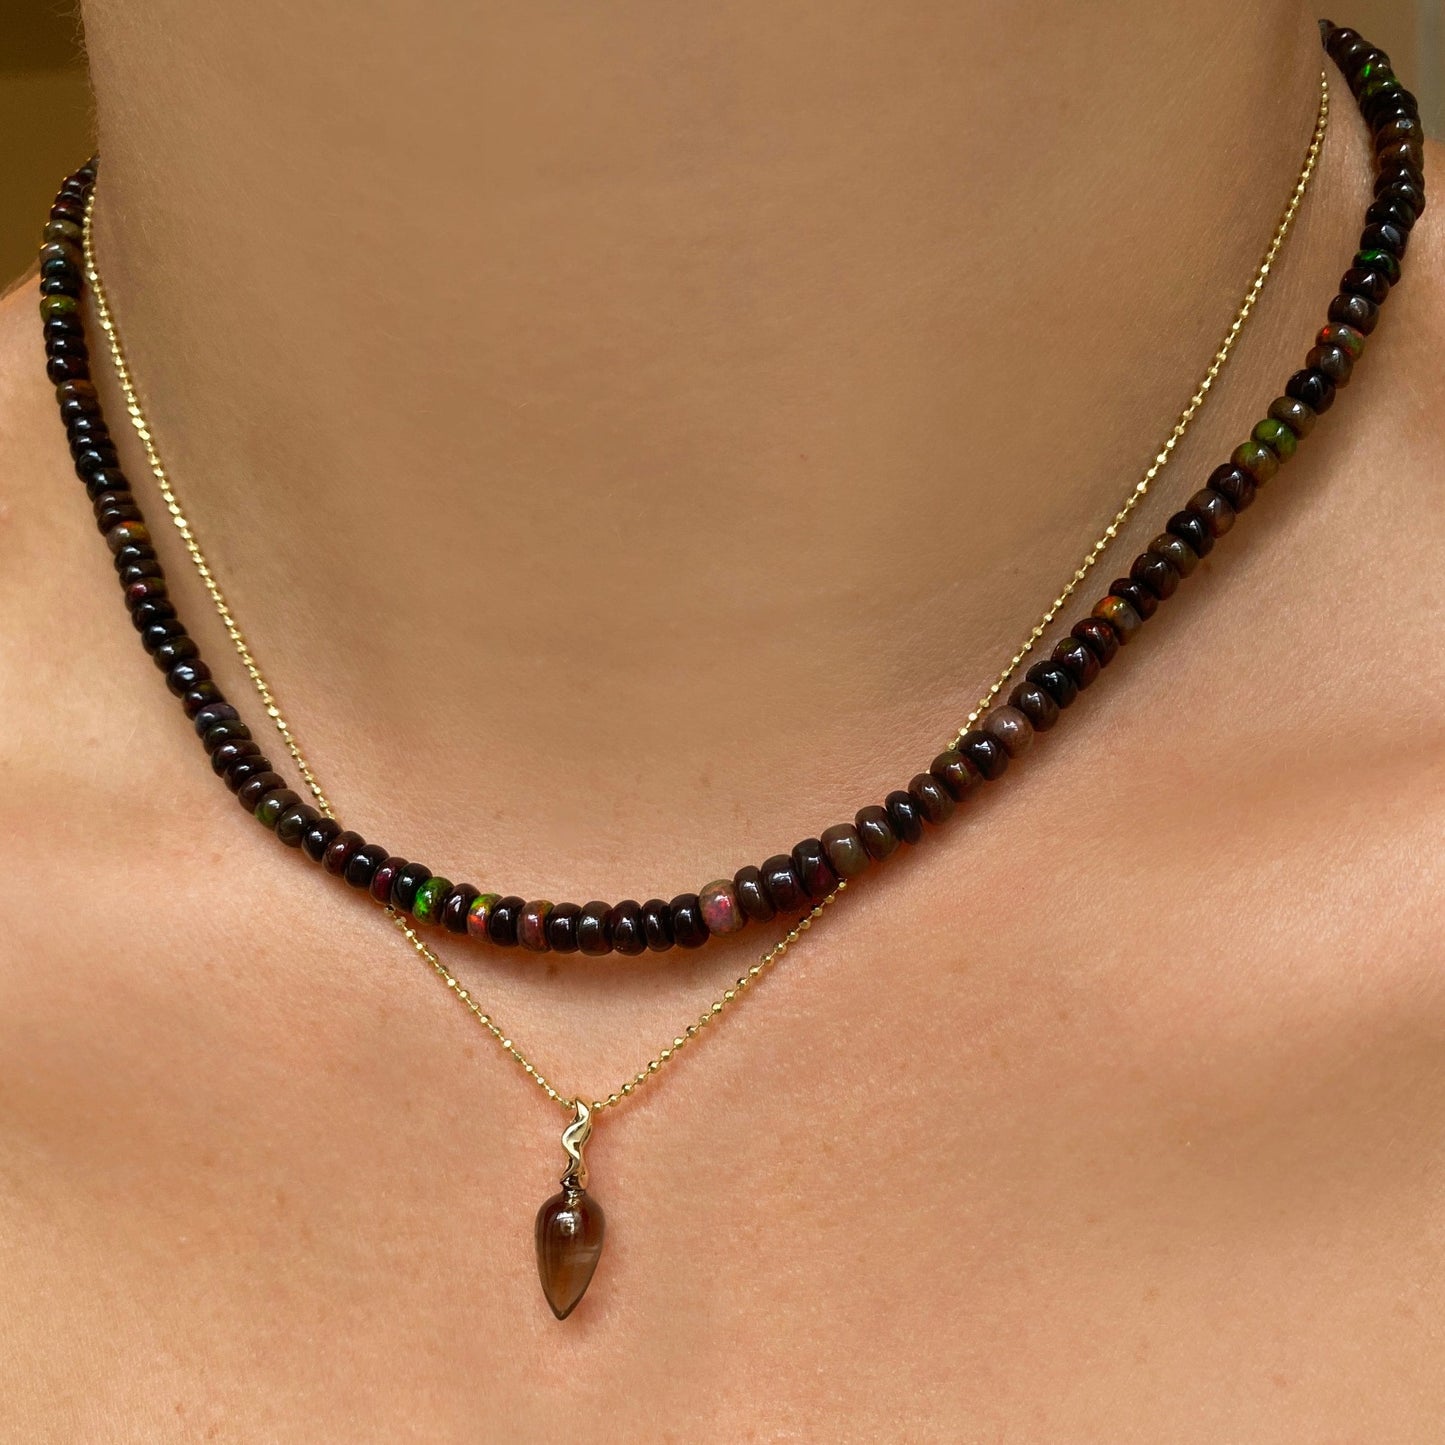 Smoky quartz acorn drop charm. Styled on a neck hanging from a diamond cut bead necklace. 